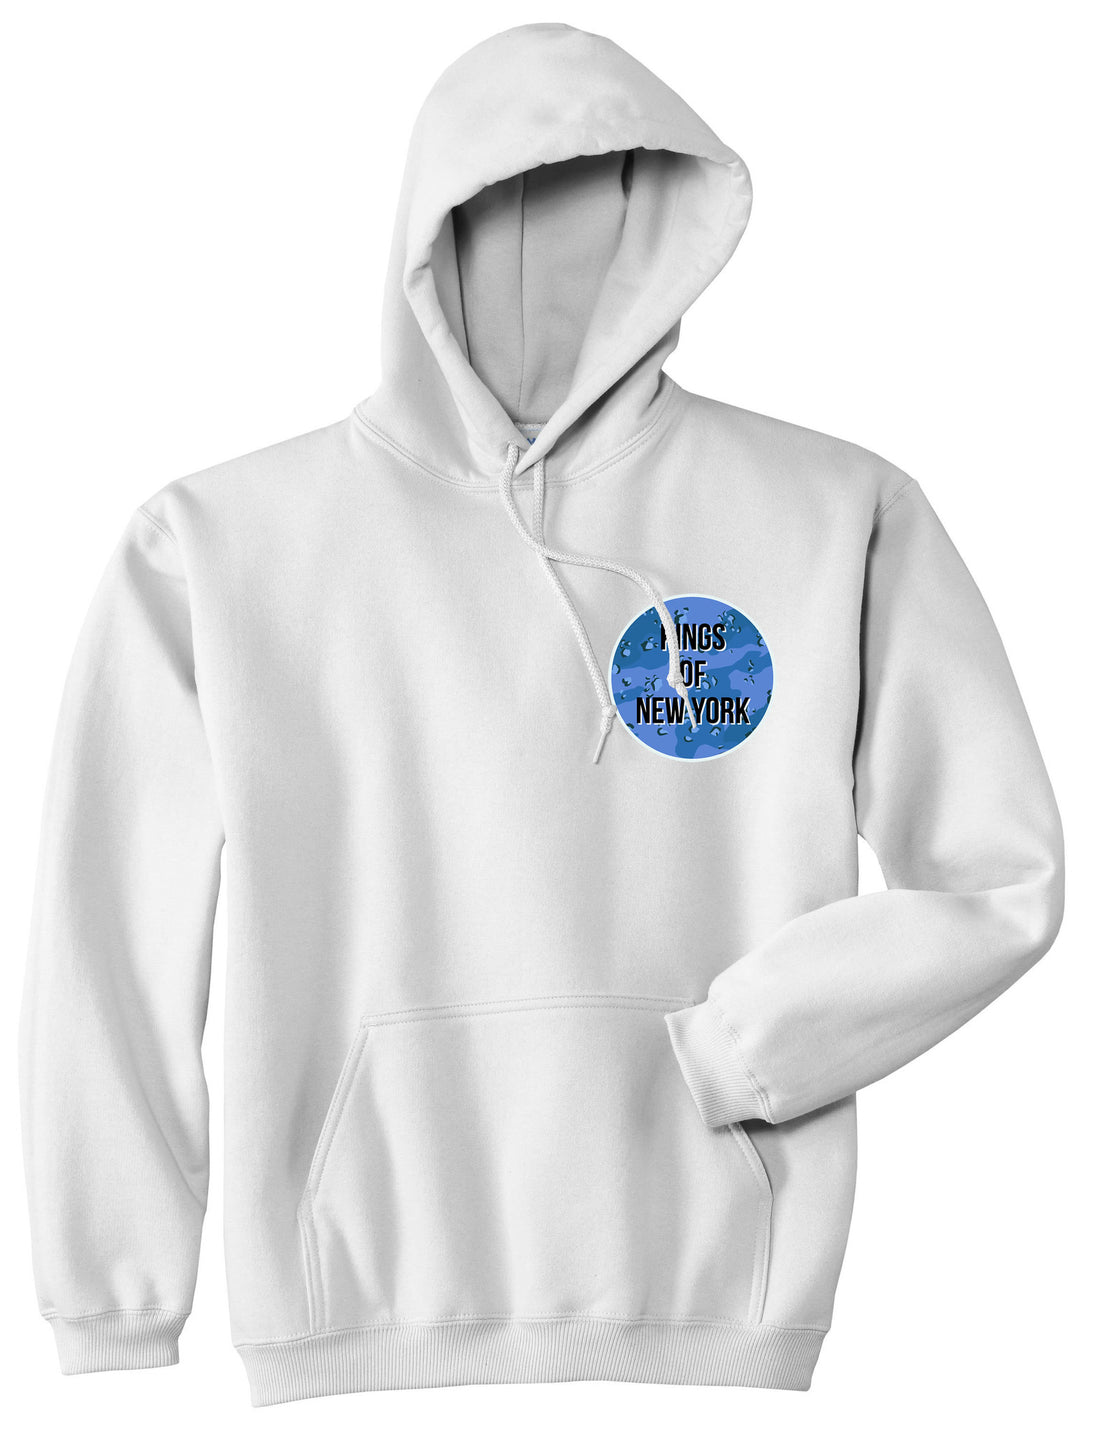  Army Chest Logo Armed Force Boys Kids Pullover Hoodie Hoody in White by Kings Of NY